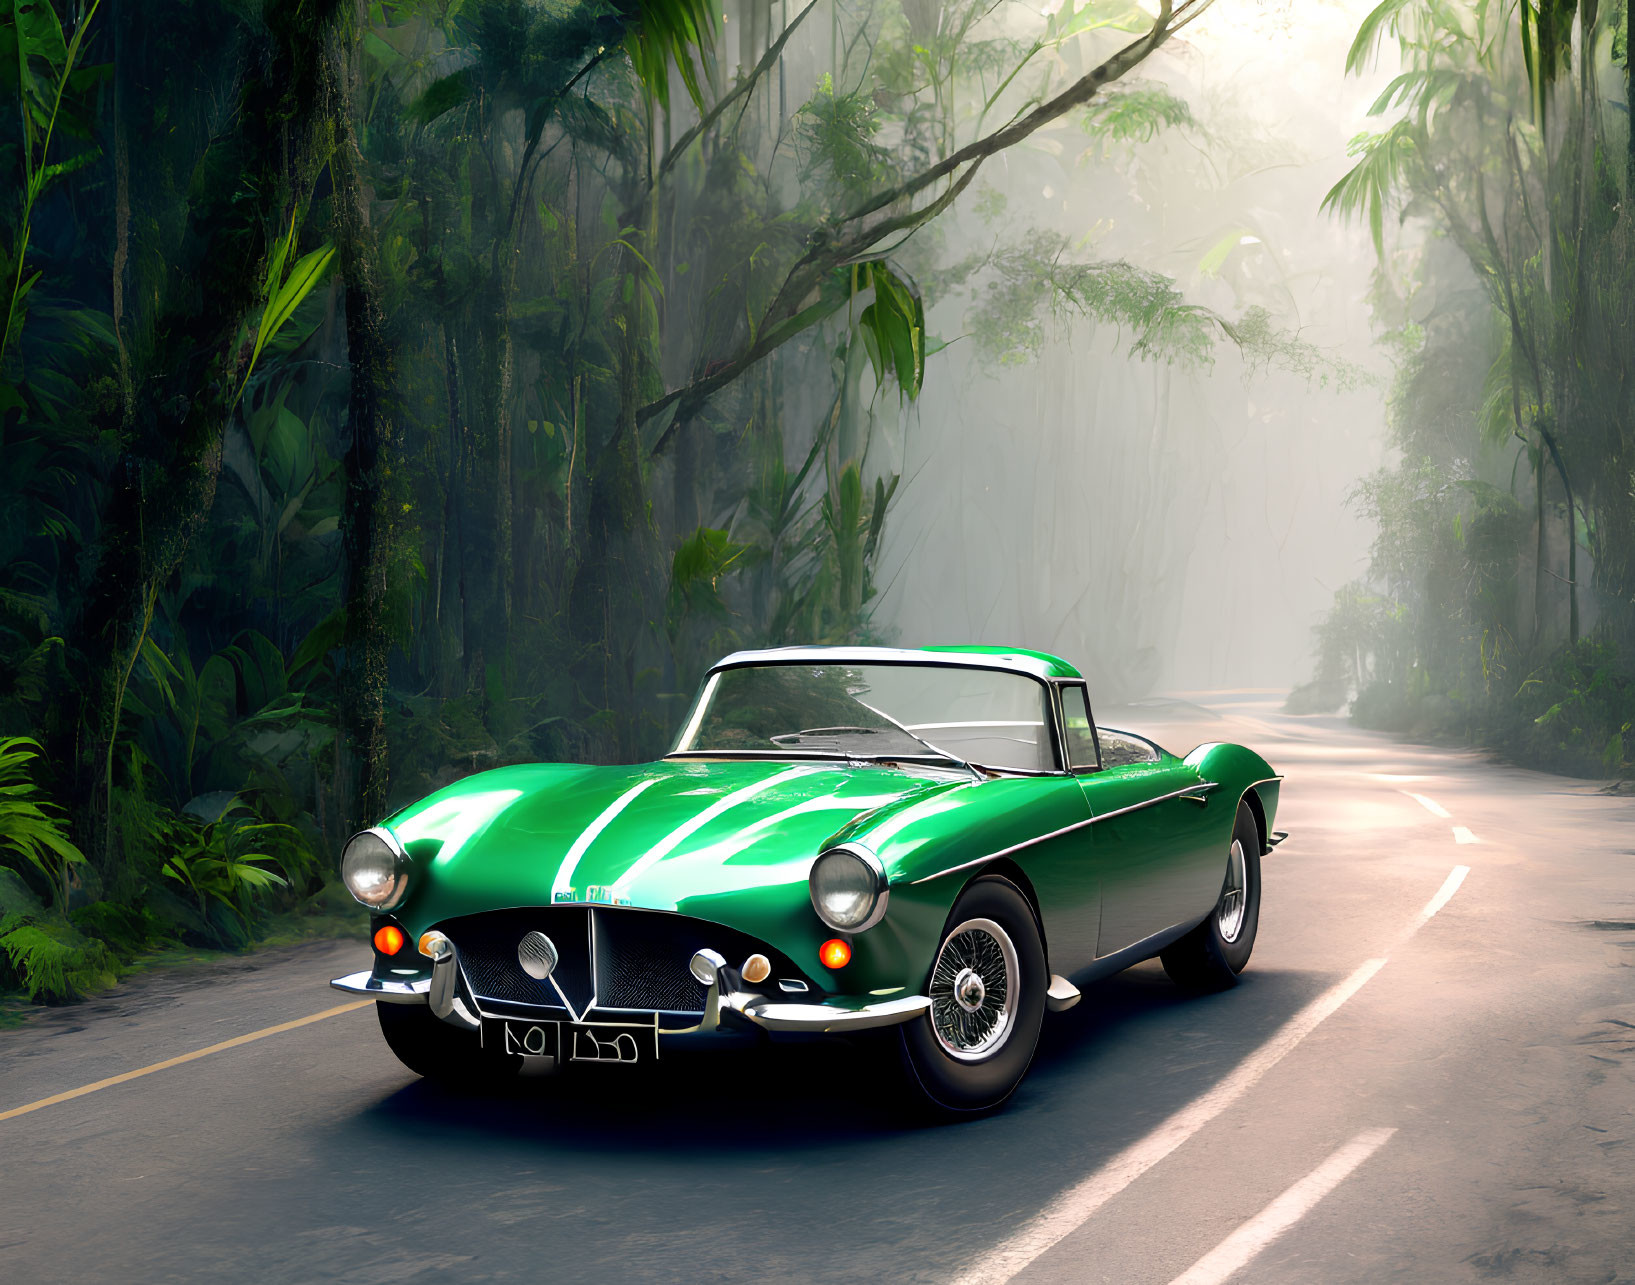 Vintage Green Convertible Car on Misty Forest Road with White Stripes